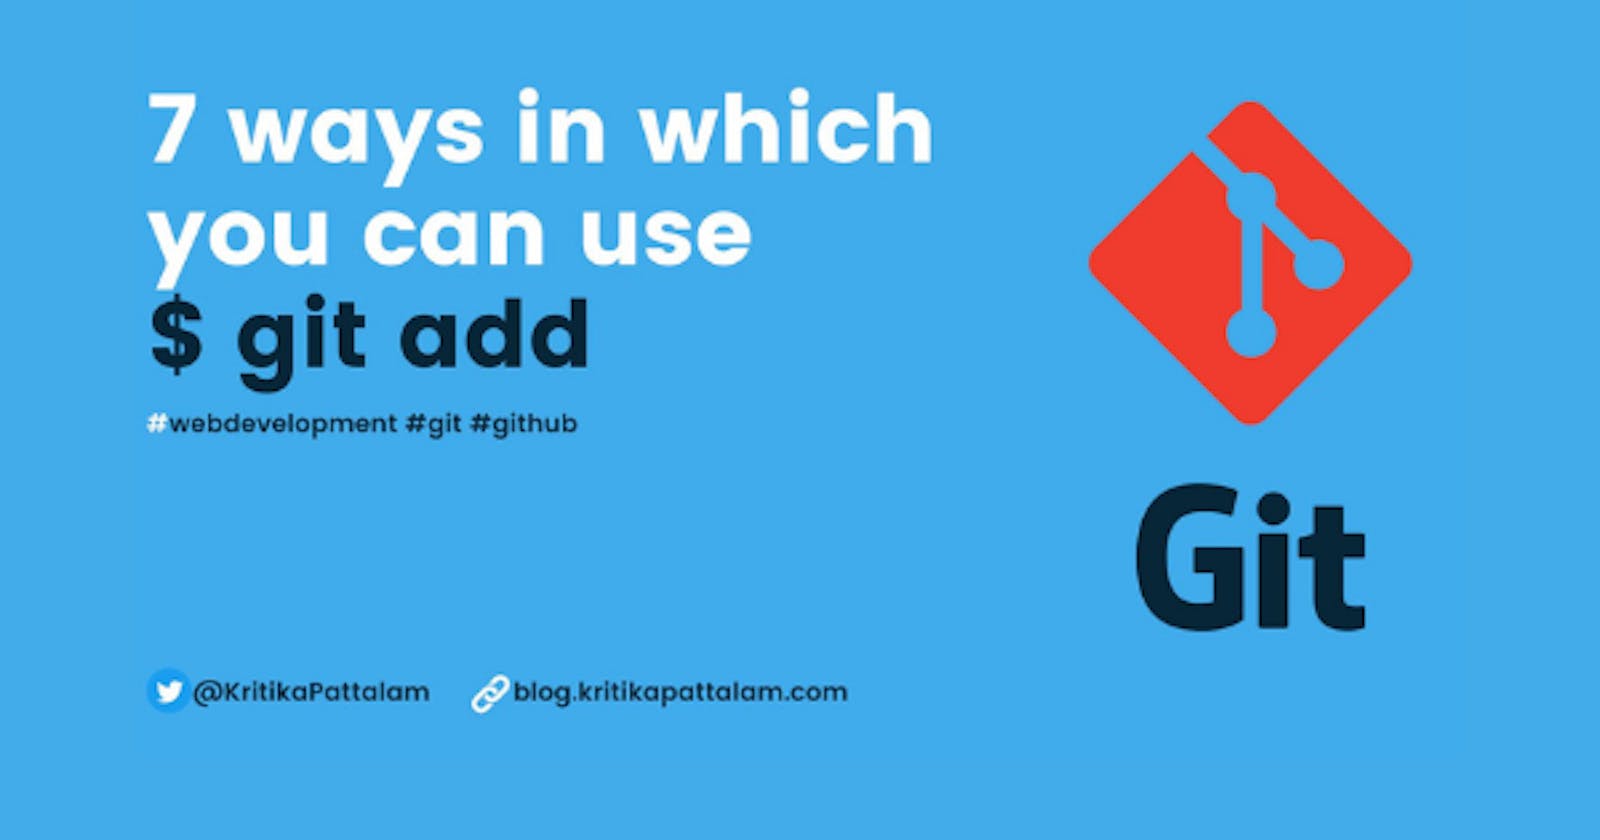 Do you use git? Then this is for you...